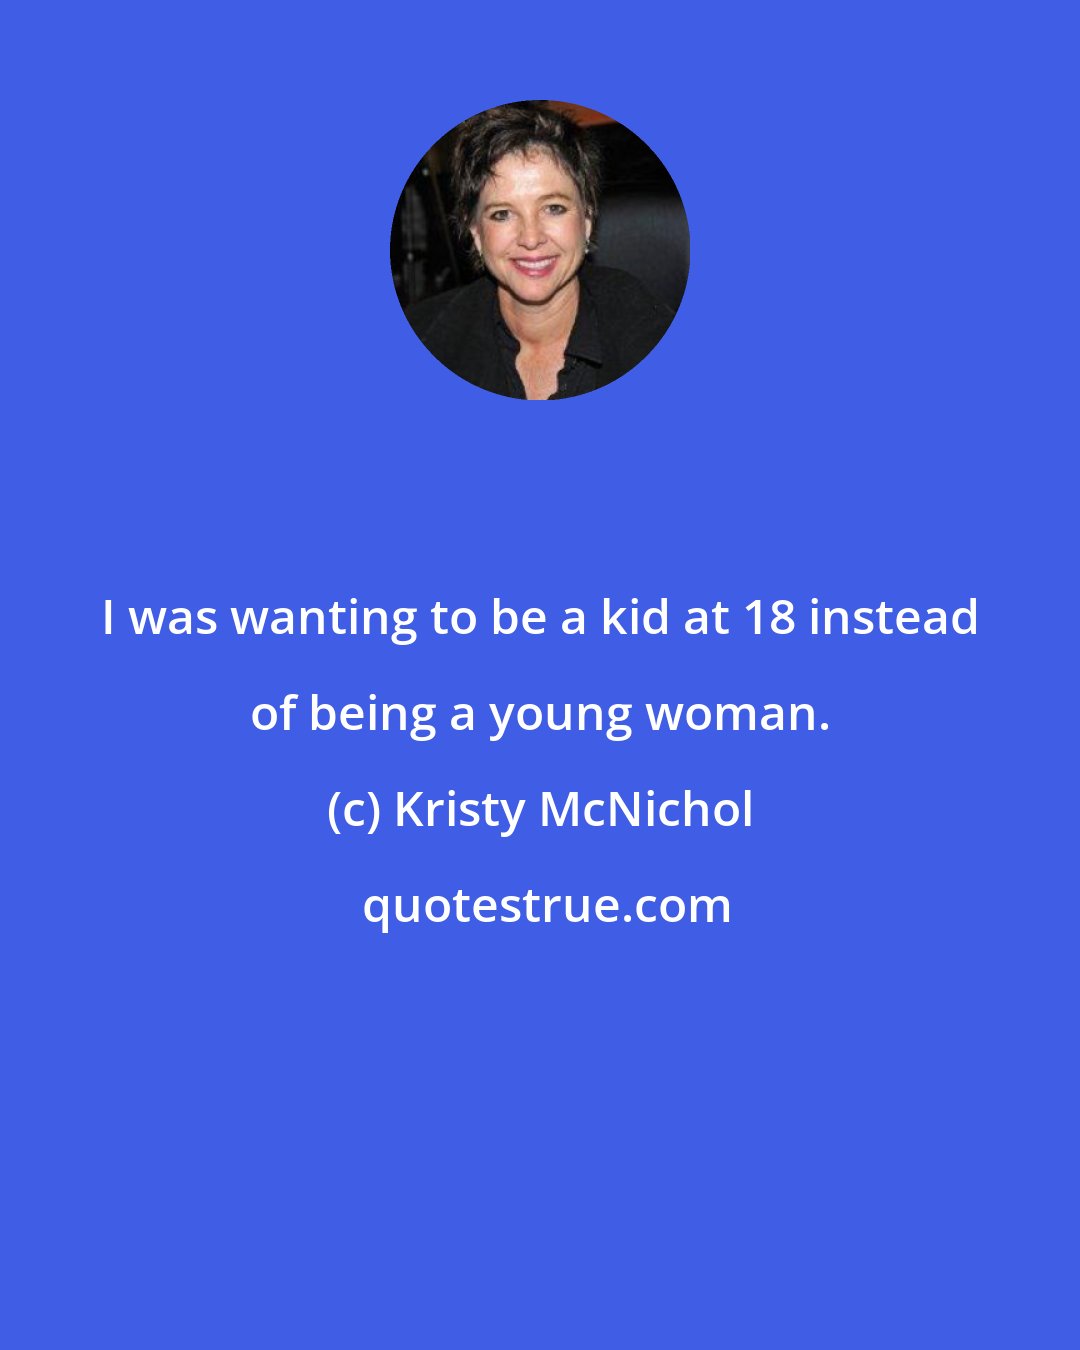 Kristy McNichol: I was wanting to be a kid at 18 instead of being a young woman.